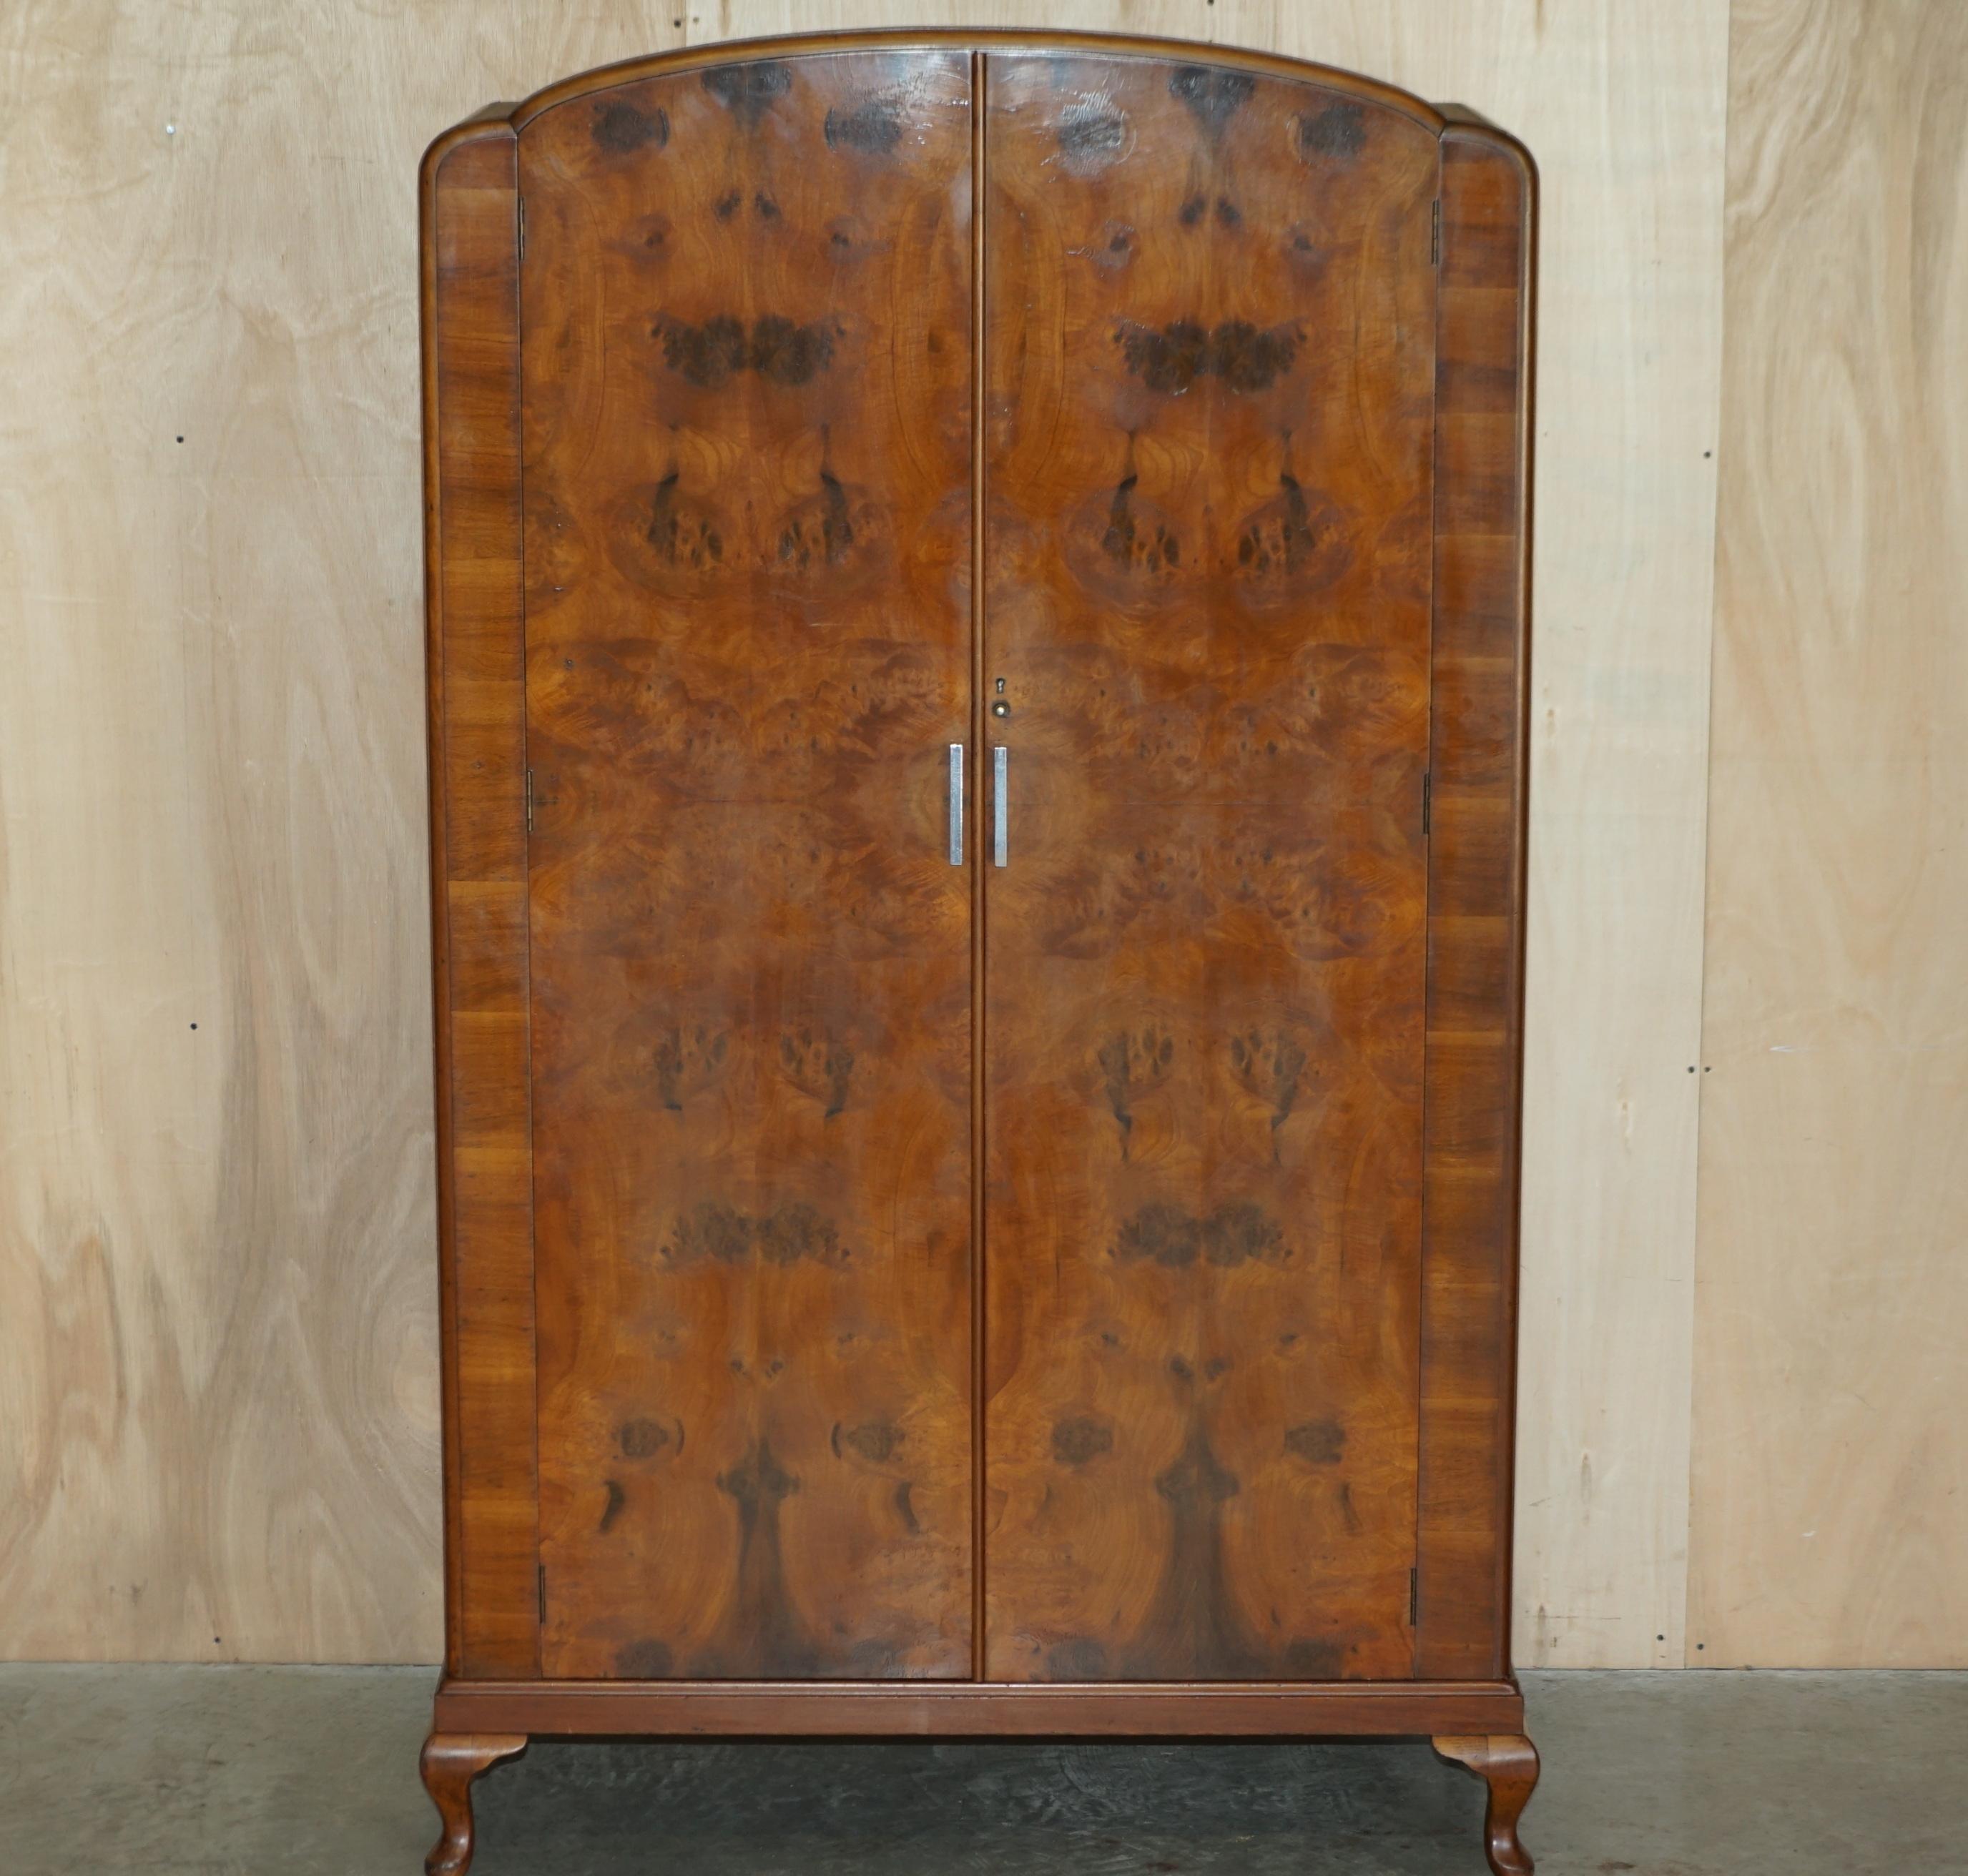 We are delighted to offer for sale this stunning burr walnut Waring & Gillow 1932 double bank wardrobe with built in mirror.

This piece is part of a suite, I also have the matching dressing table, bedside tables and twin beds along with a triple